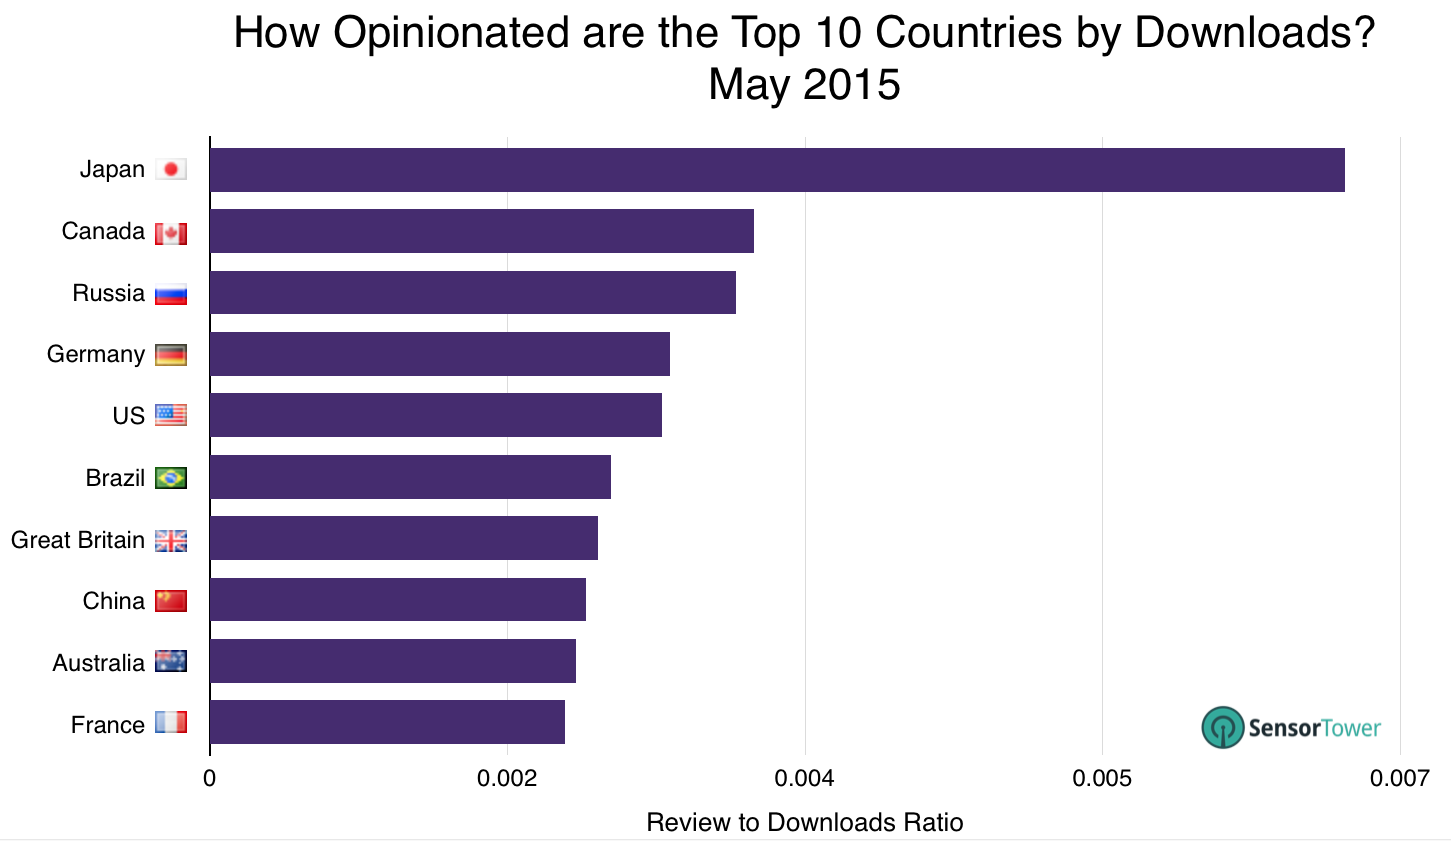 lt="Most Opinionated Countries